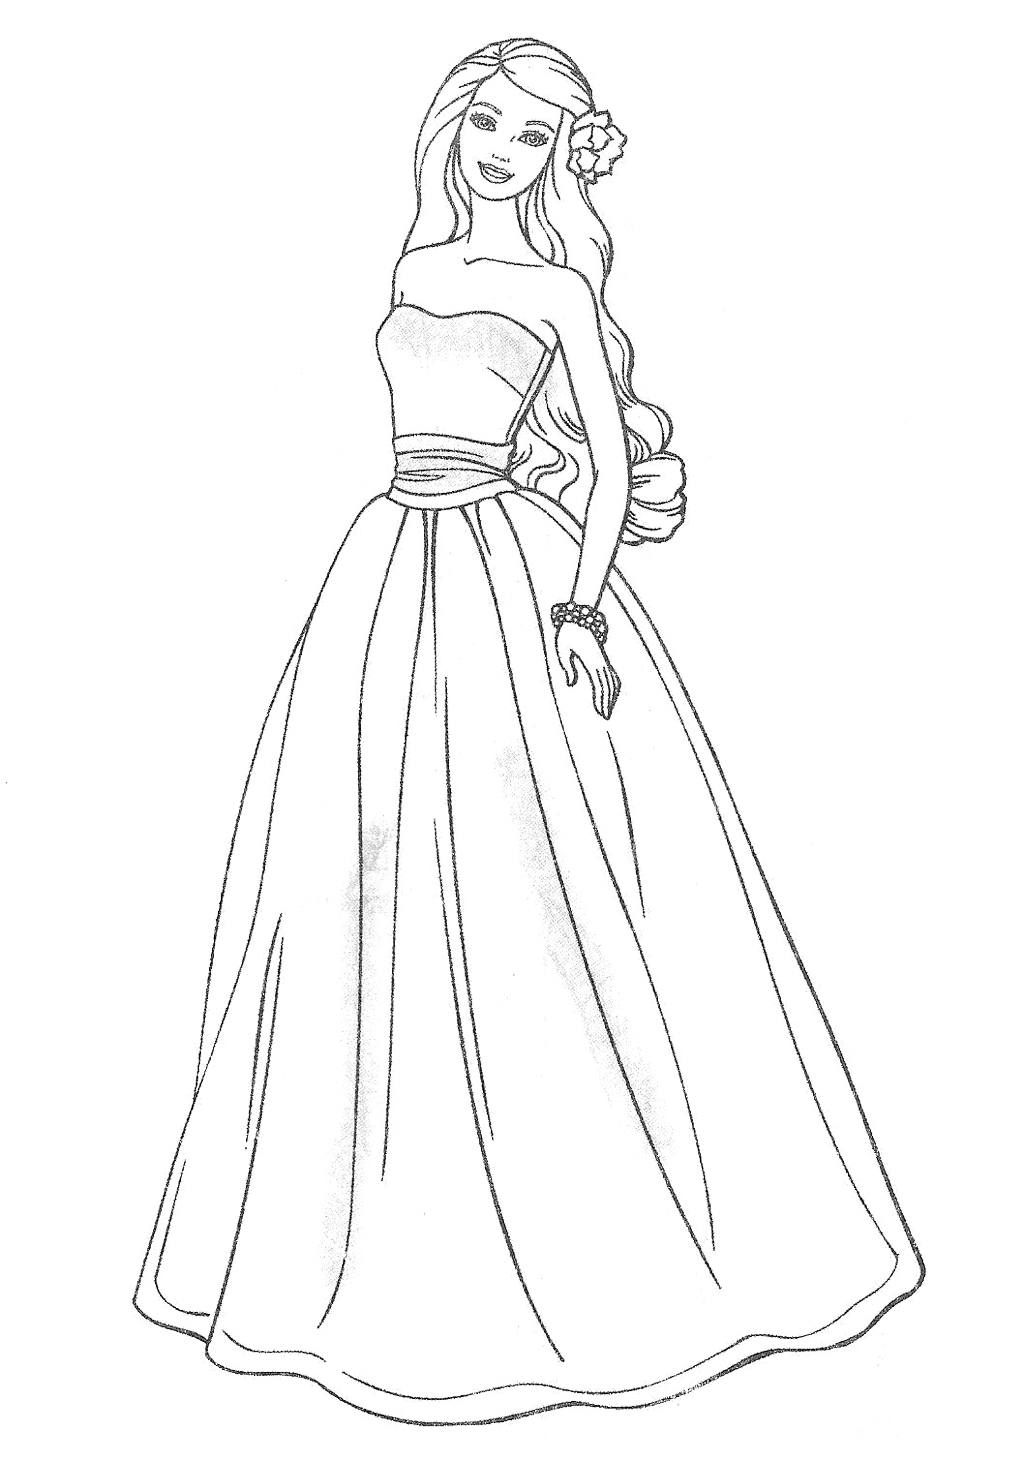 Party Dress Coloring Page - Get Coloring Pages